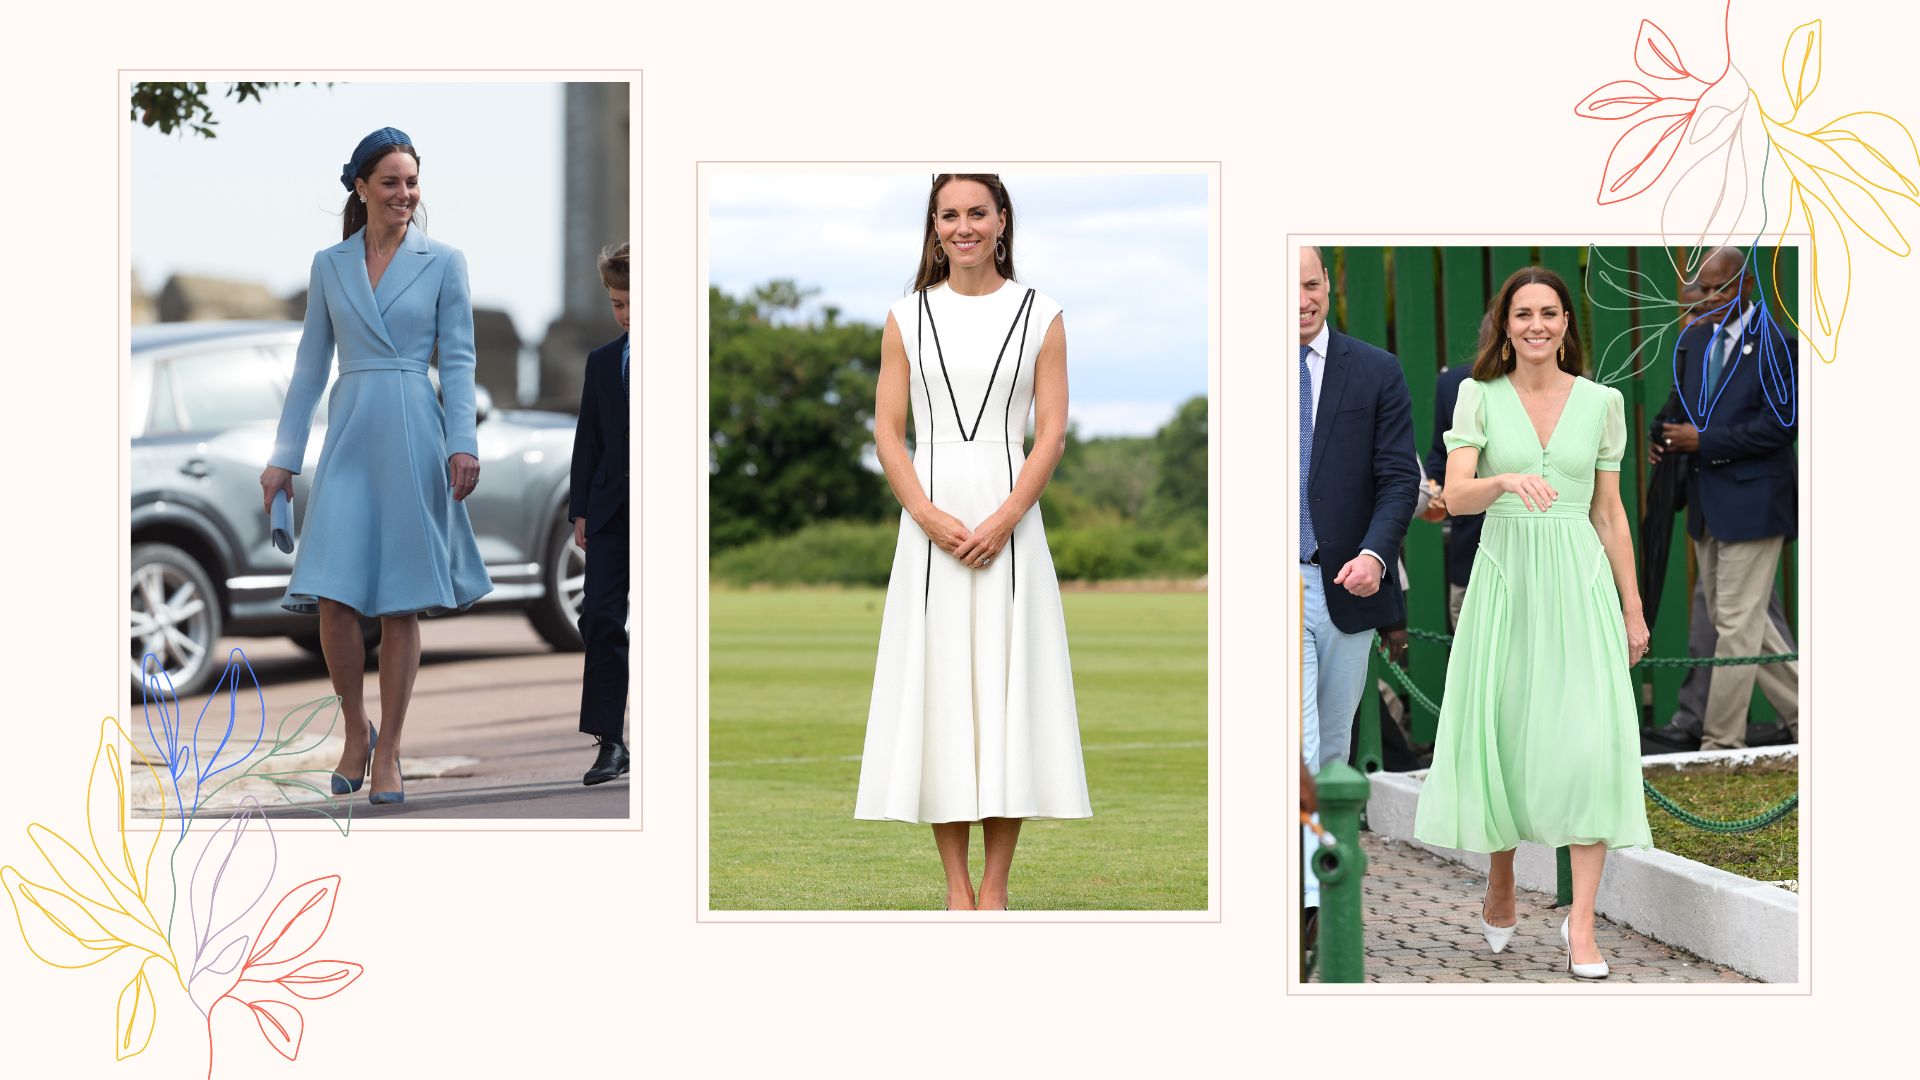 Kate Middleton's 10 Best Casual Shopping Outfits - Dress Like A Duchess